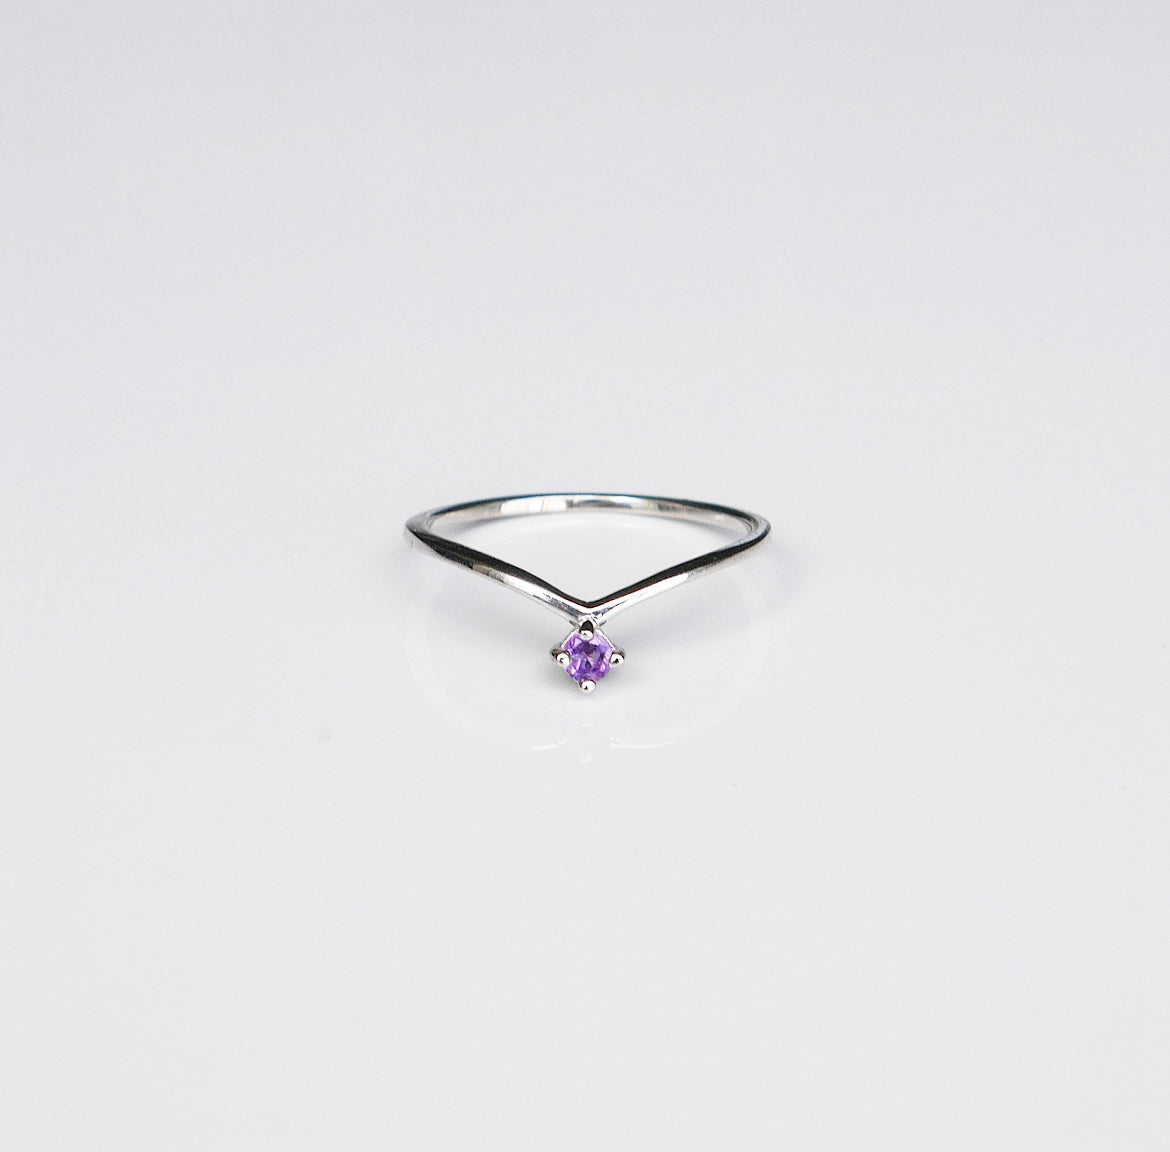 Tiny amethyst ring, small amethyst ring, amethyst jewelry, chakra jewelry, healing crystals jewelry, lucky jewelry, jewelry store in Miami, jewelry store in Brickell, dainty rings, delicate rings, popular rings, popular jewelry Kesley Boutique, Girlwith3jobs, shopping in Miami 